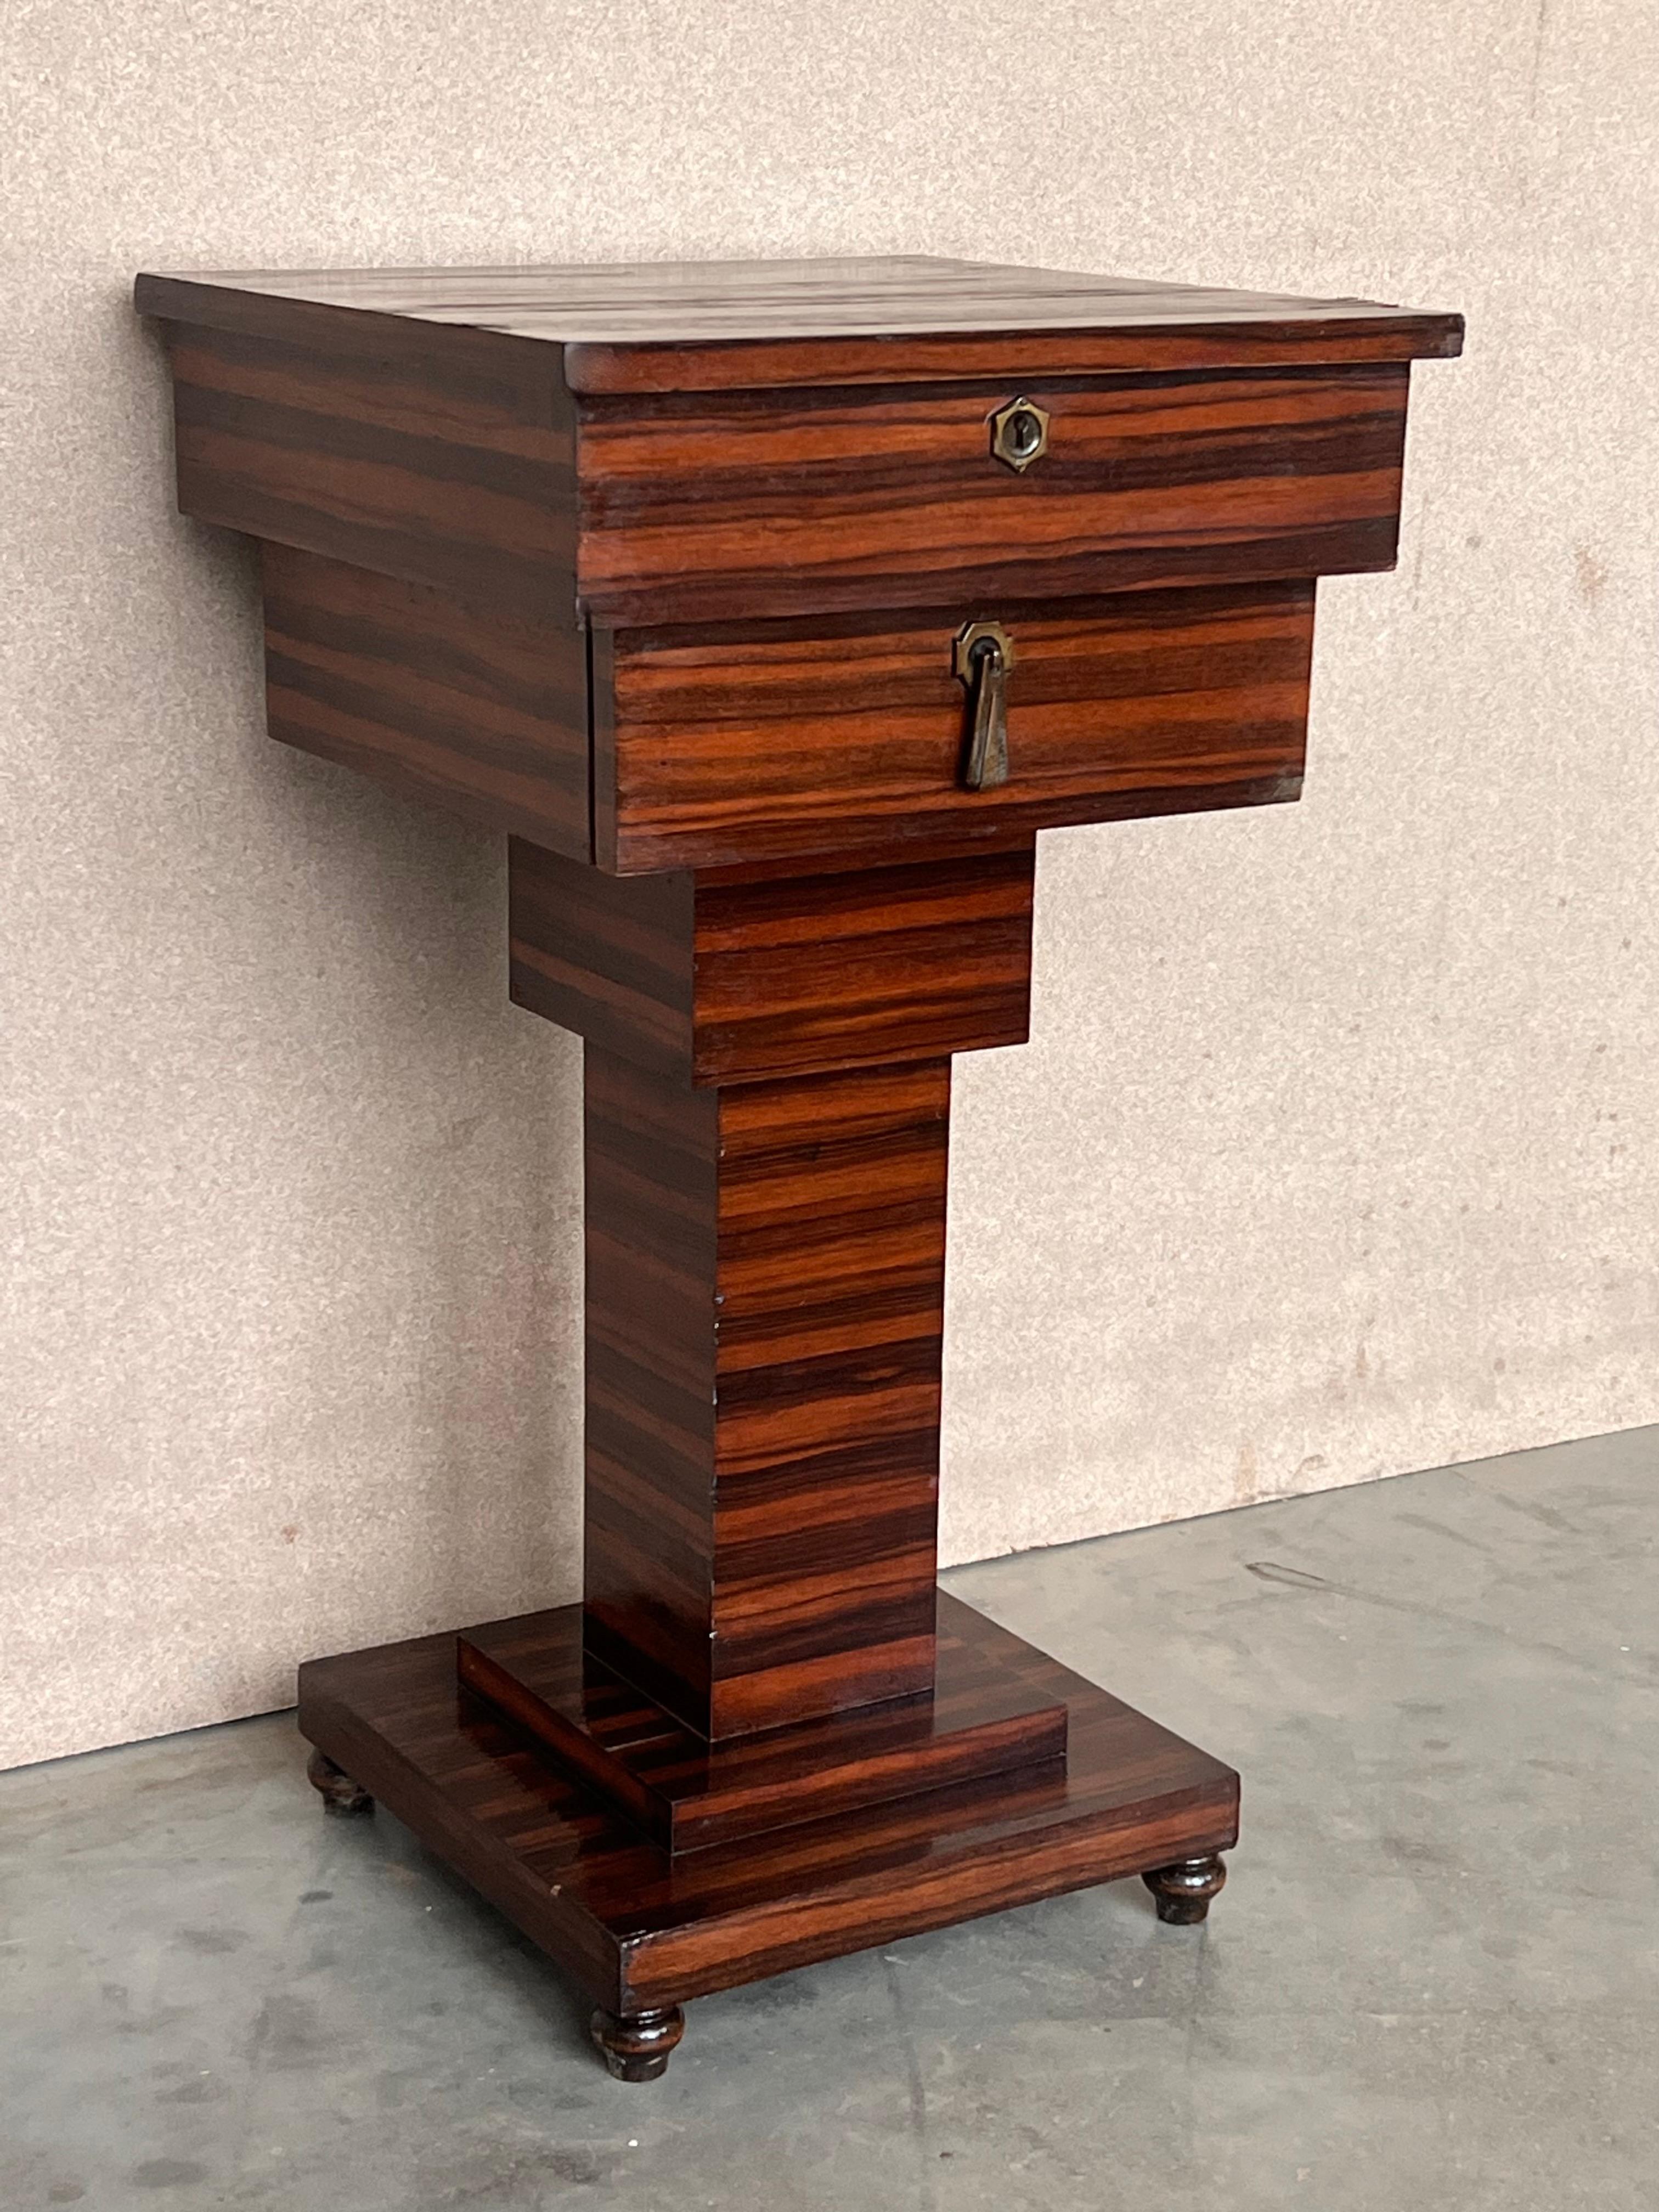 Mahogany Art Deco Sewing or Jelwery Box on Stand, circa 1860 In Good Condition For Sale In Miami, FL